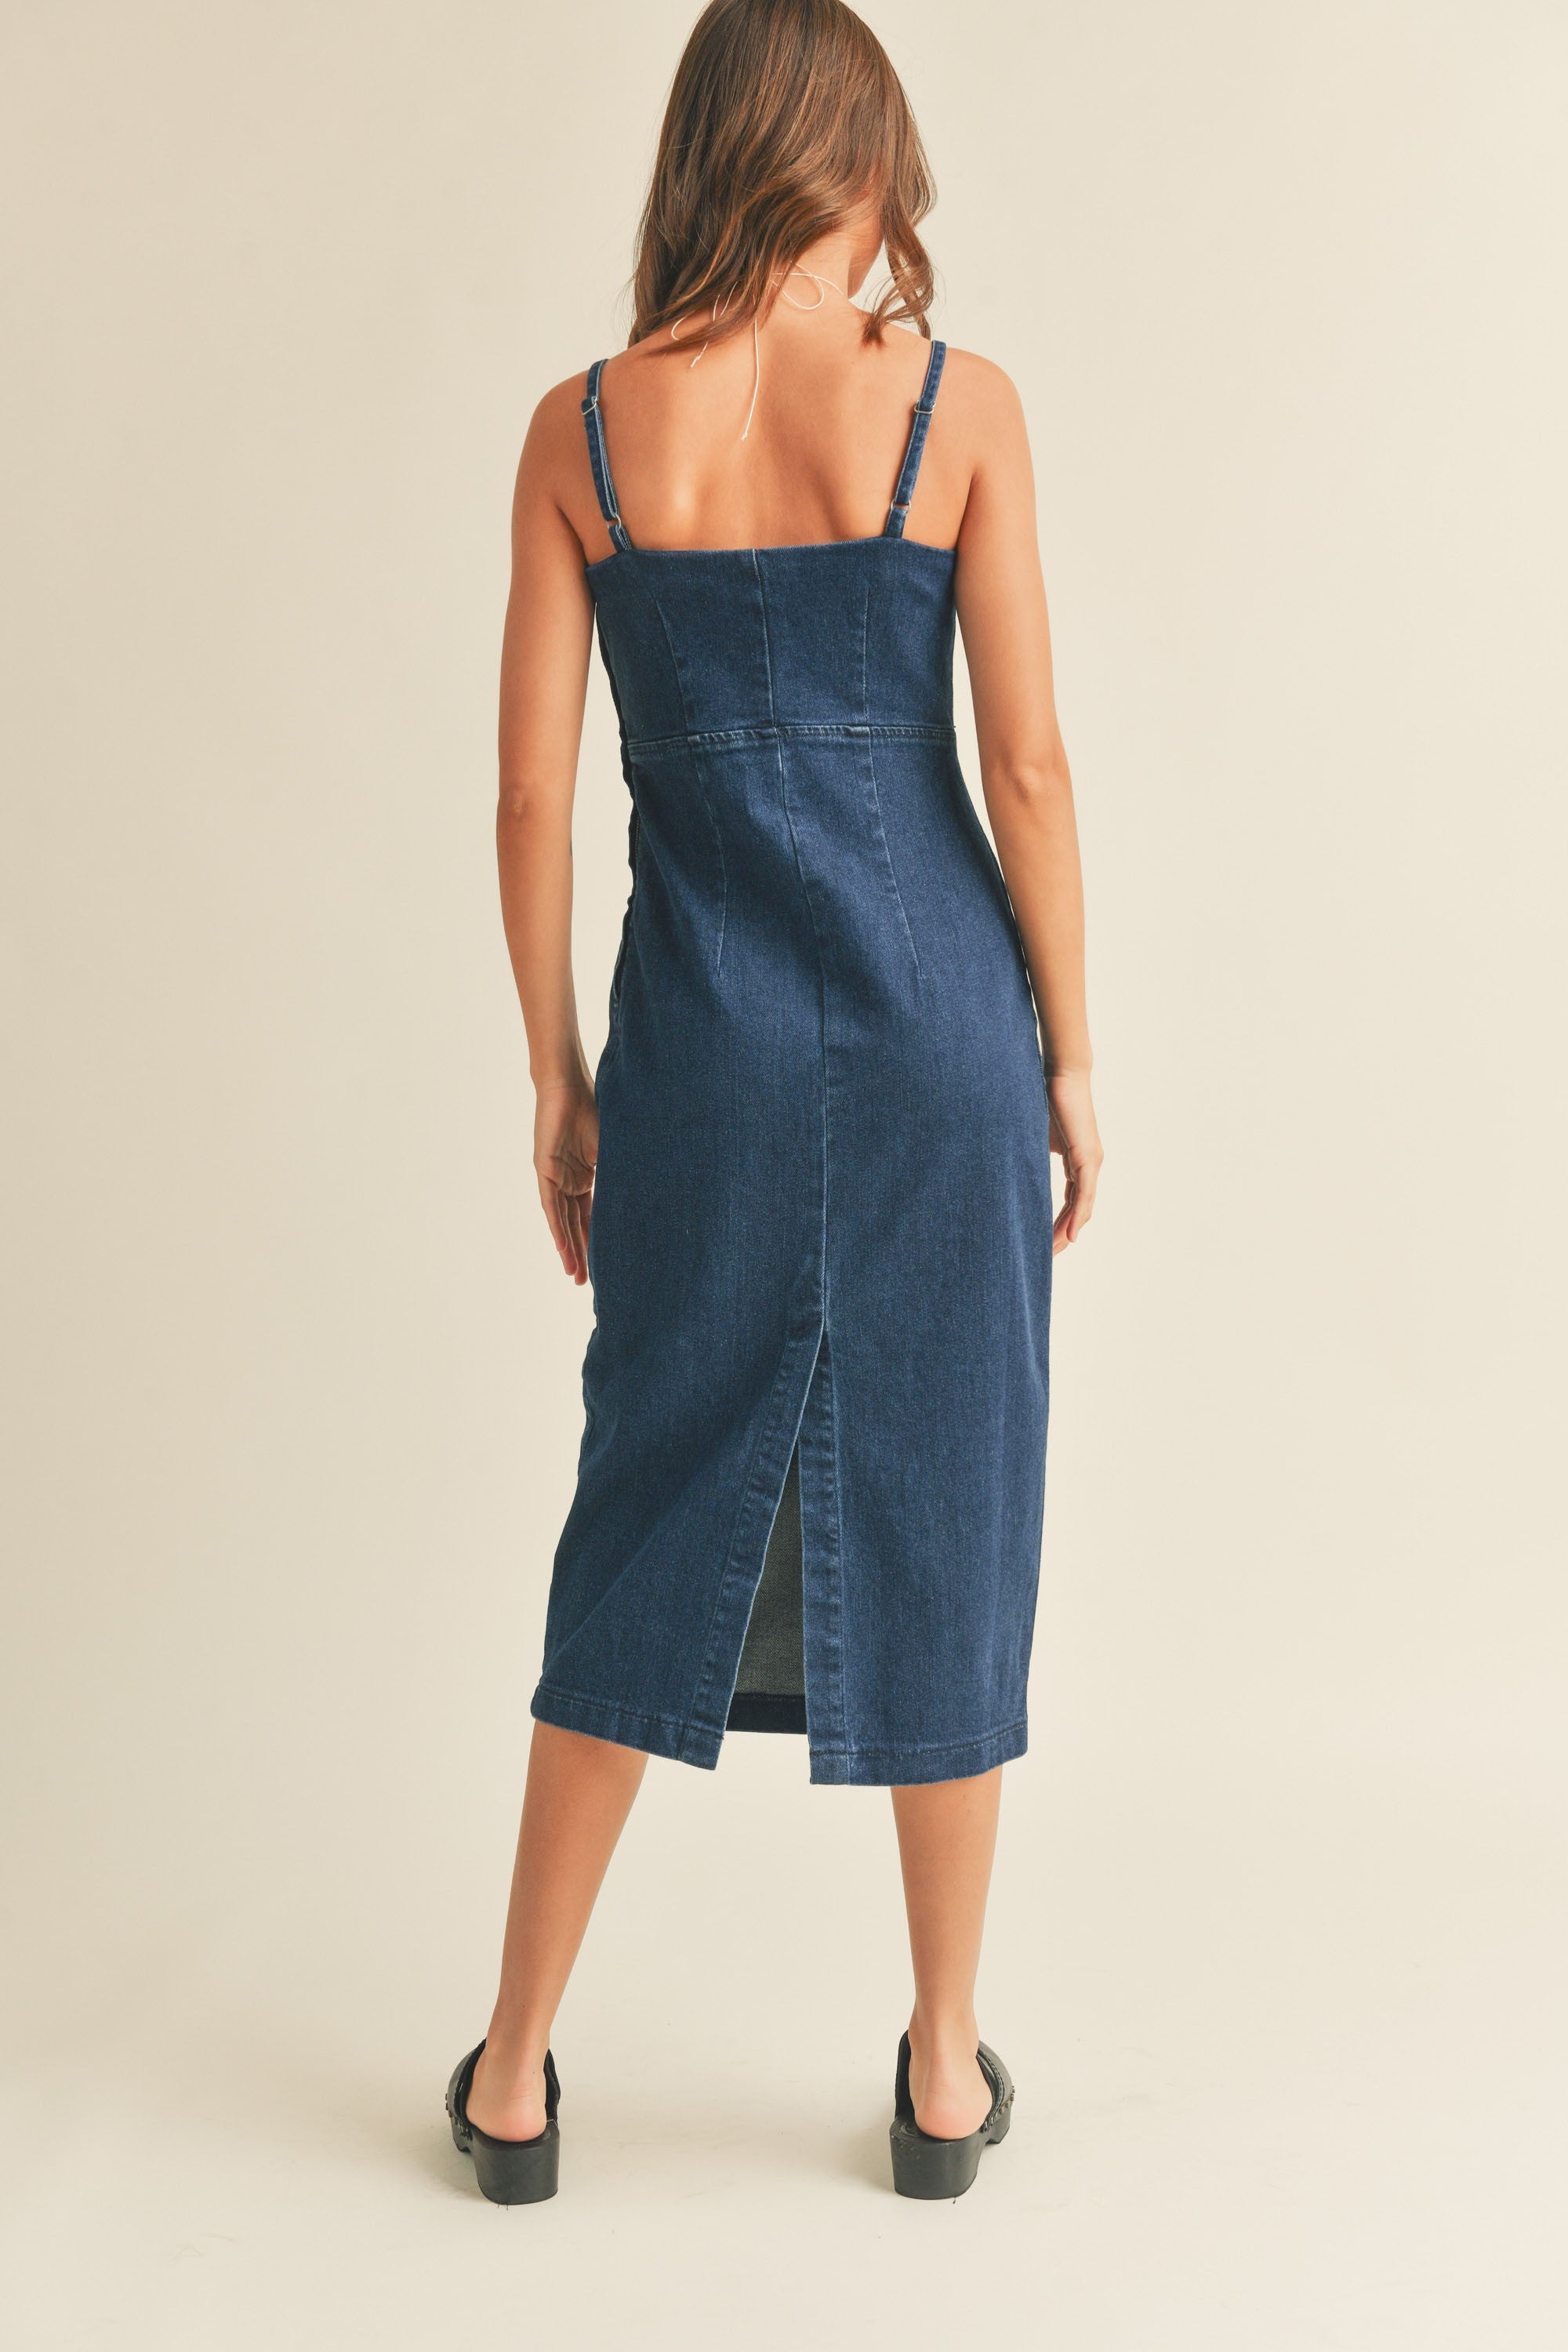 Holly Willoughby Denim Midi Dress This Morning March 2022 – Fashion You  Really Want